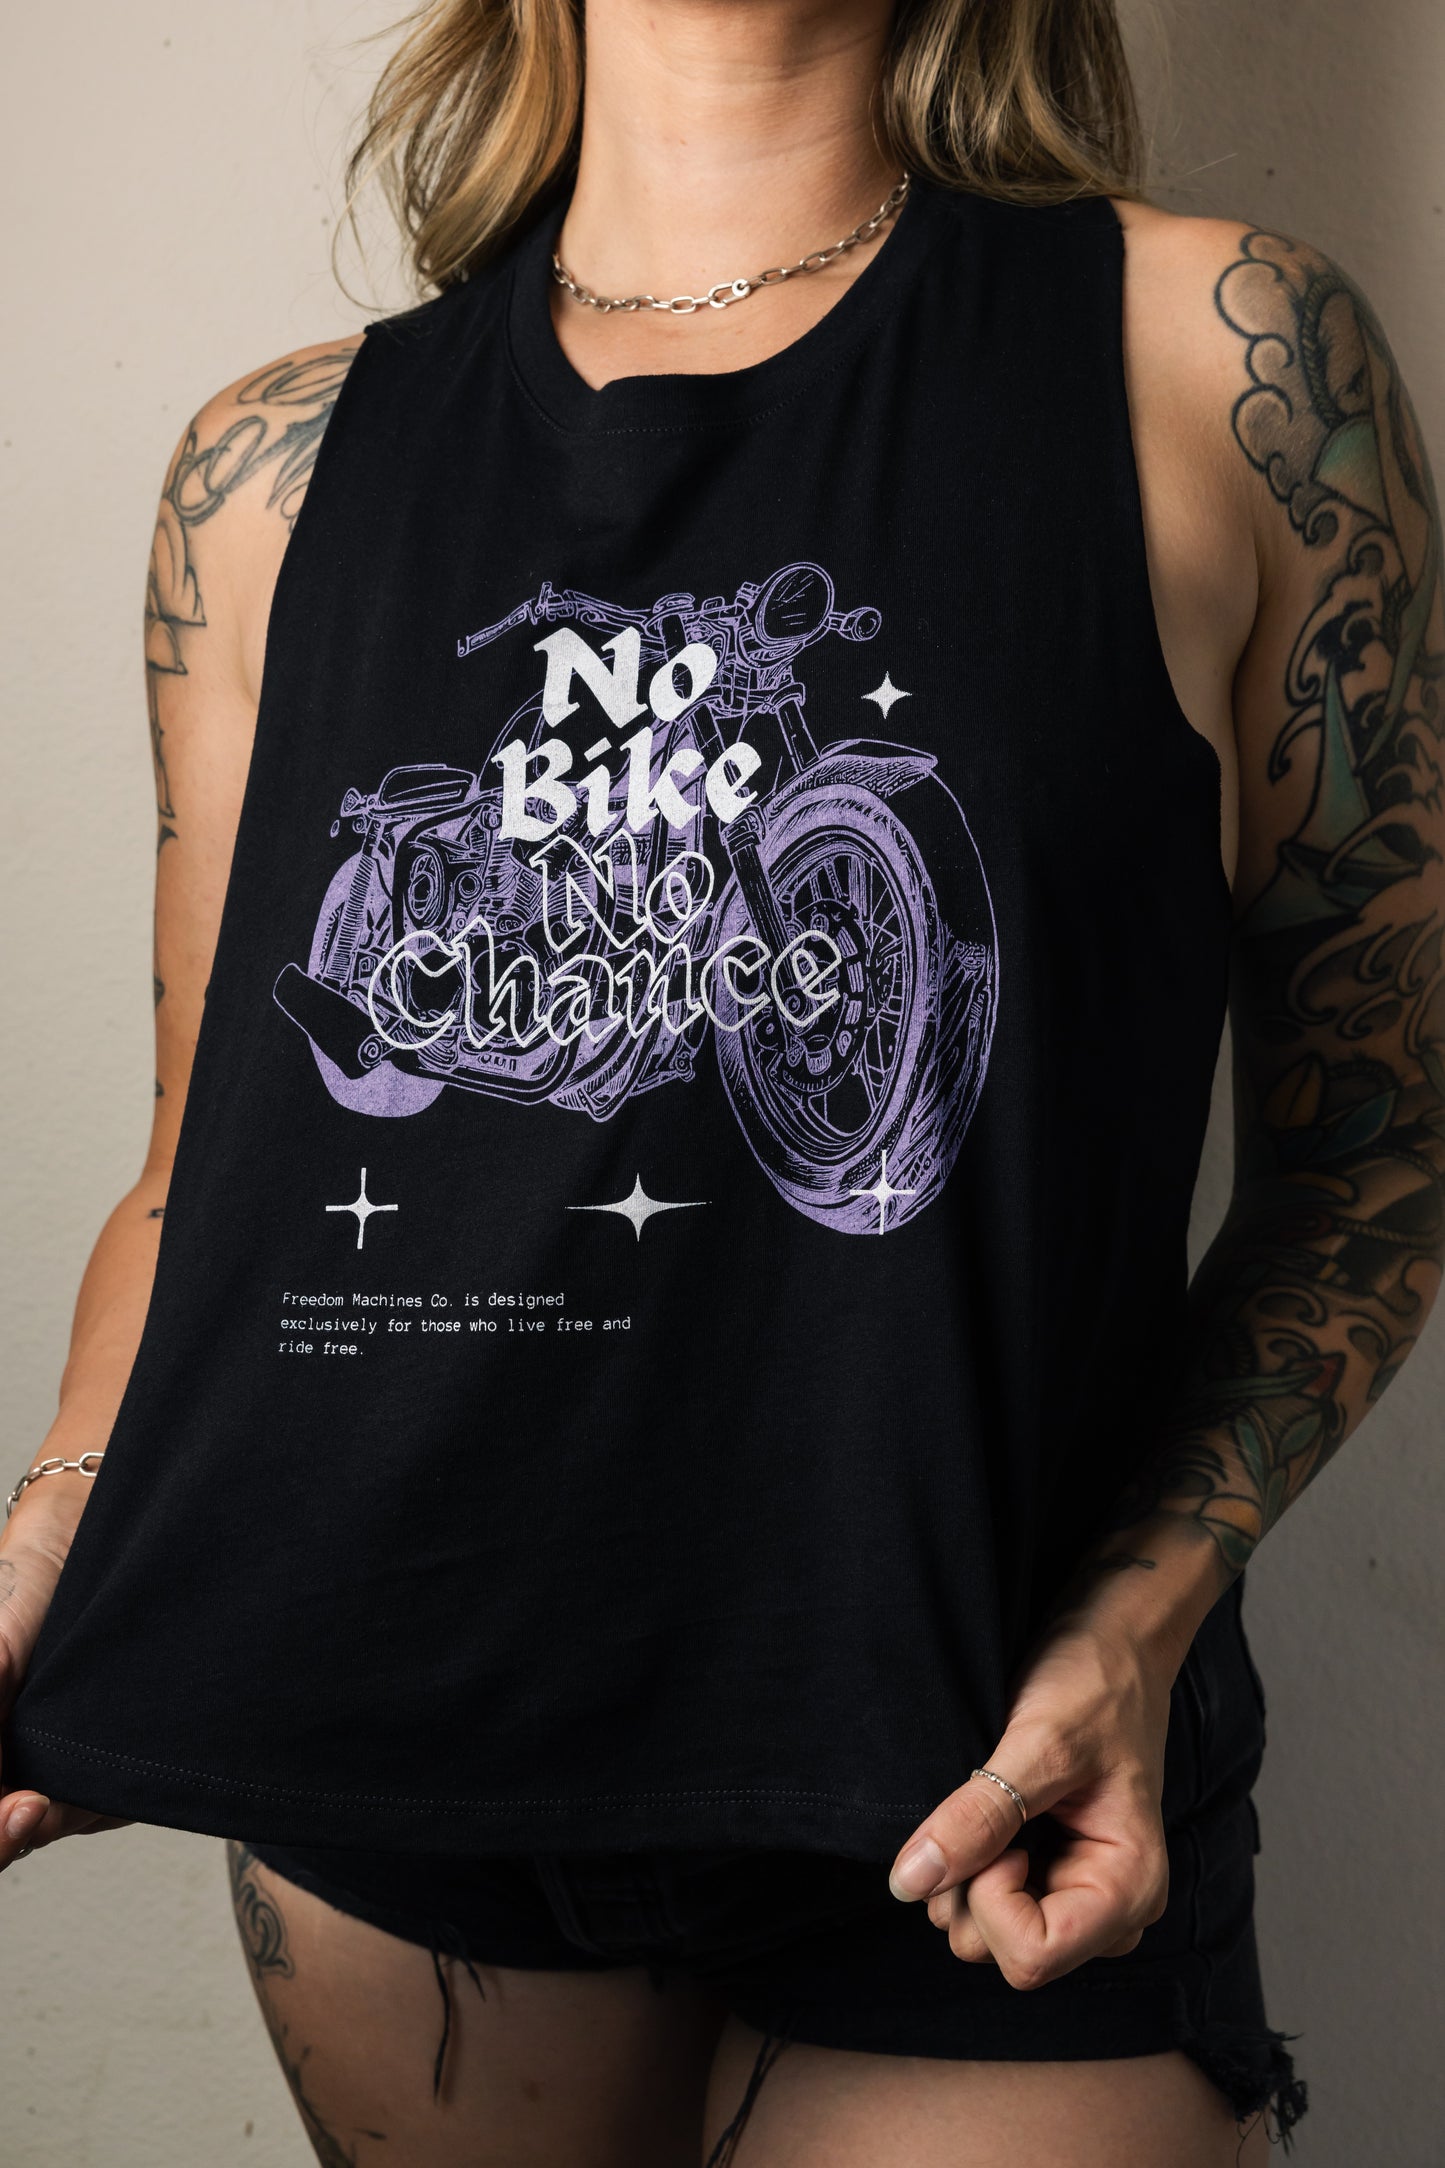 female model with tattoos posing in a black tank top. Tank top has a motorcycle on it with the words no bike no chance. Harley Davidson style streetwear